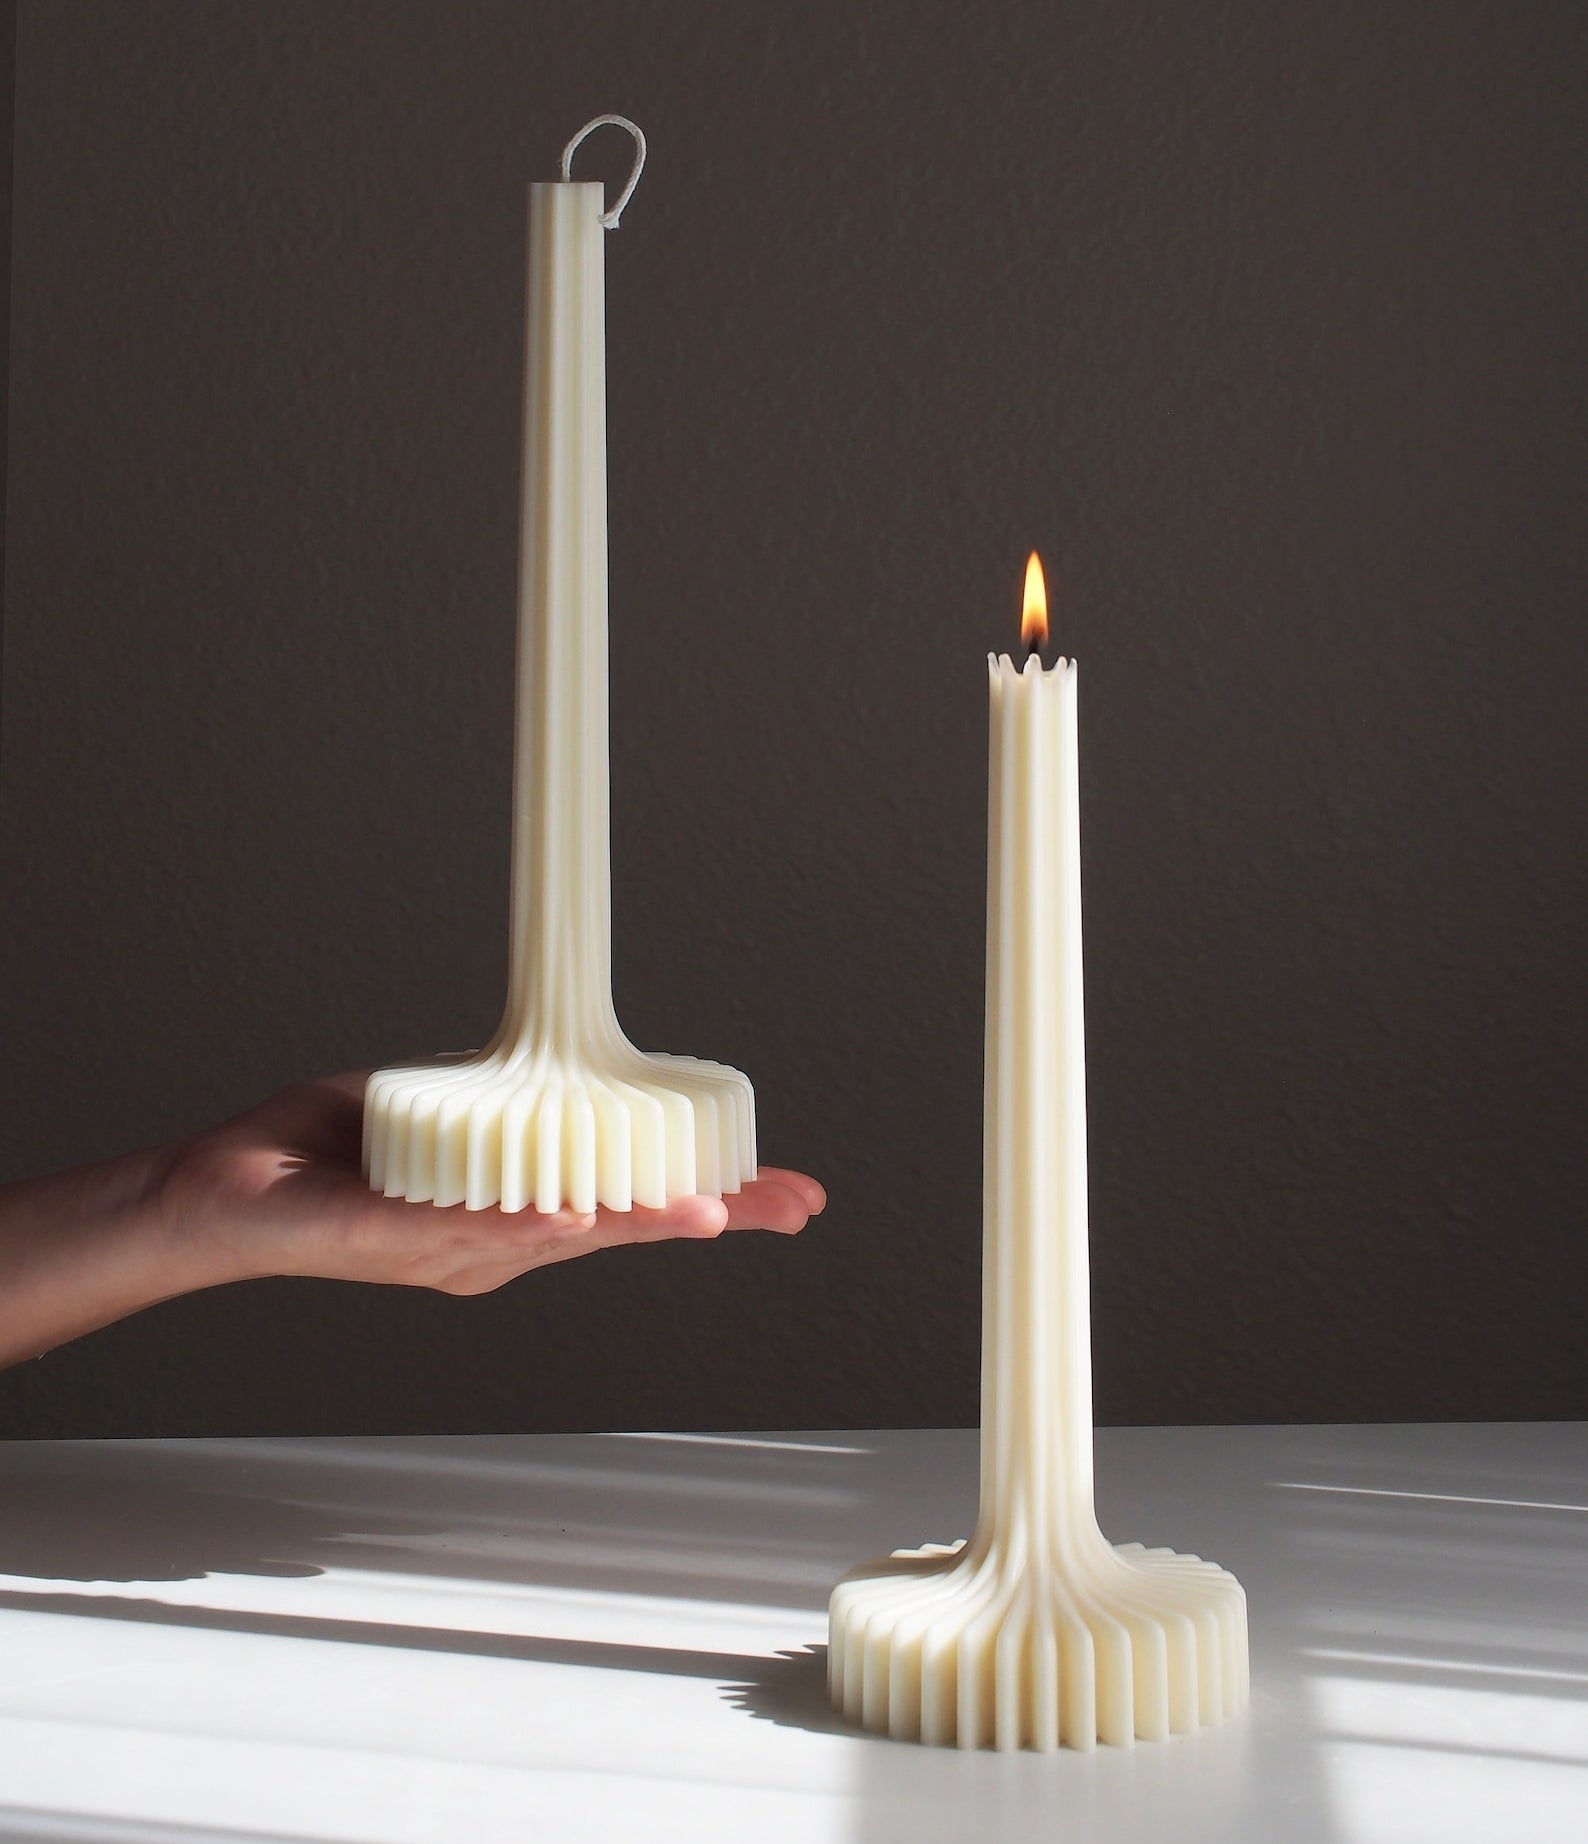 Person holding an unlit ribbed candle similar to the lit one standing on a surface